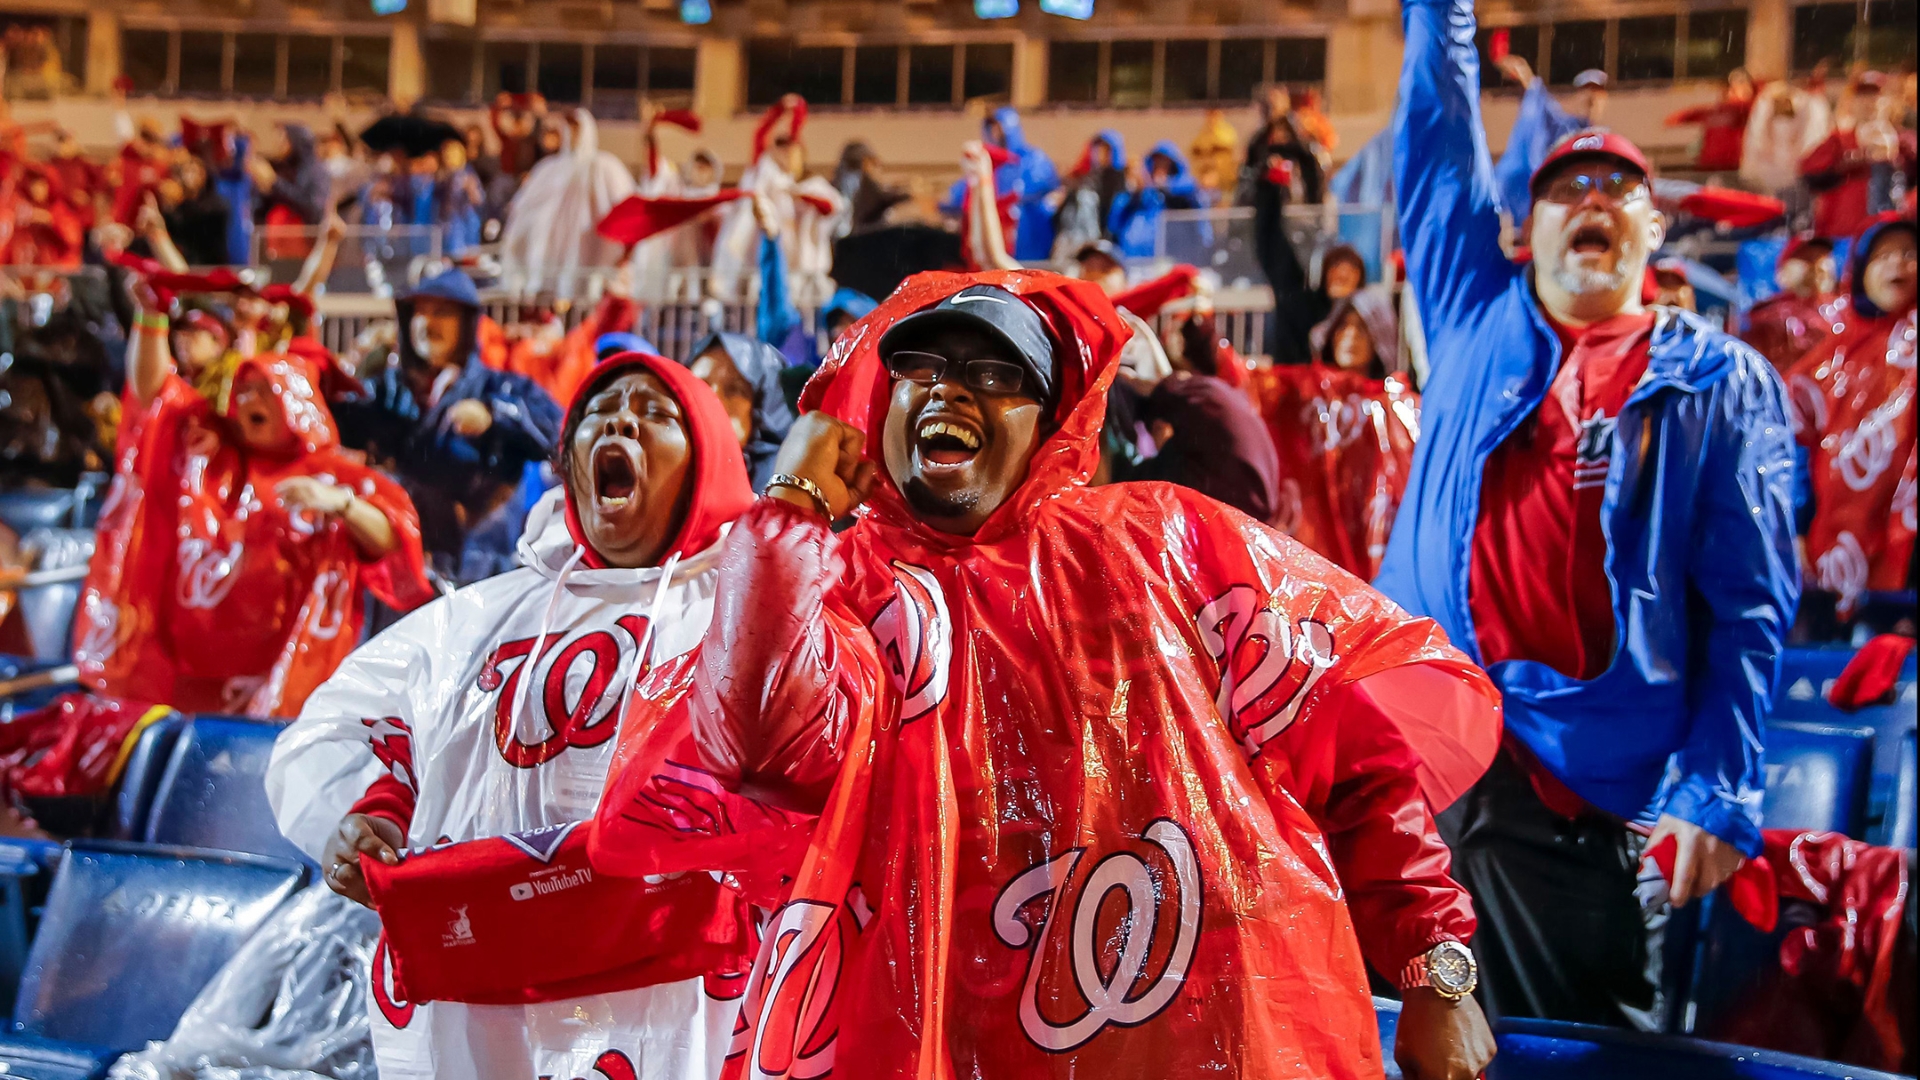 Fans celebrate Nats World Series title win - WTOP News